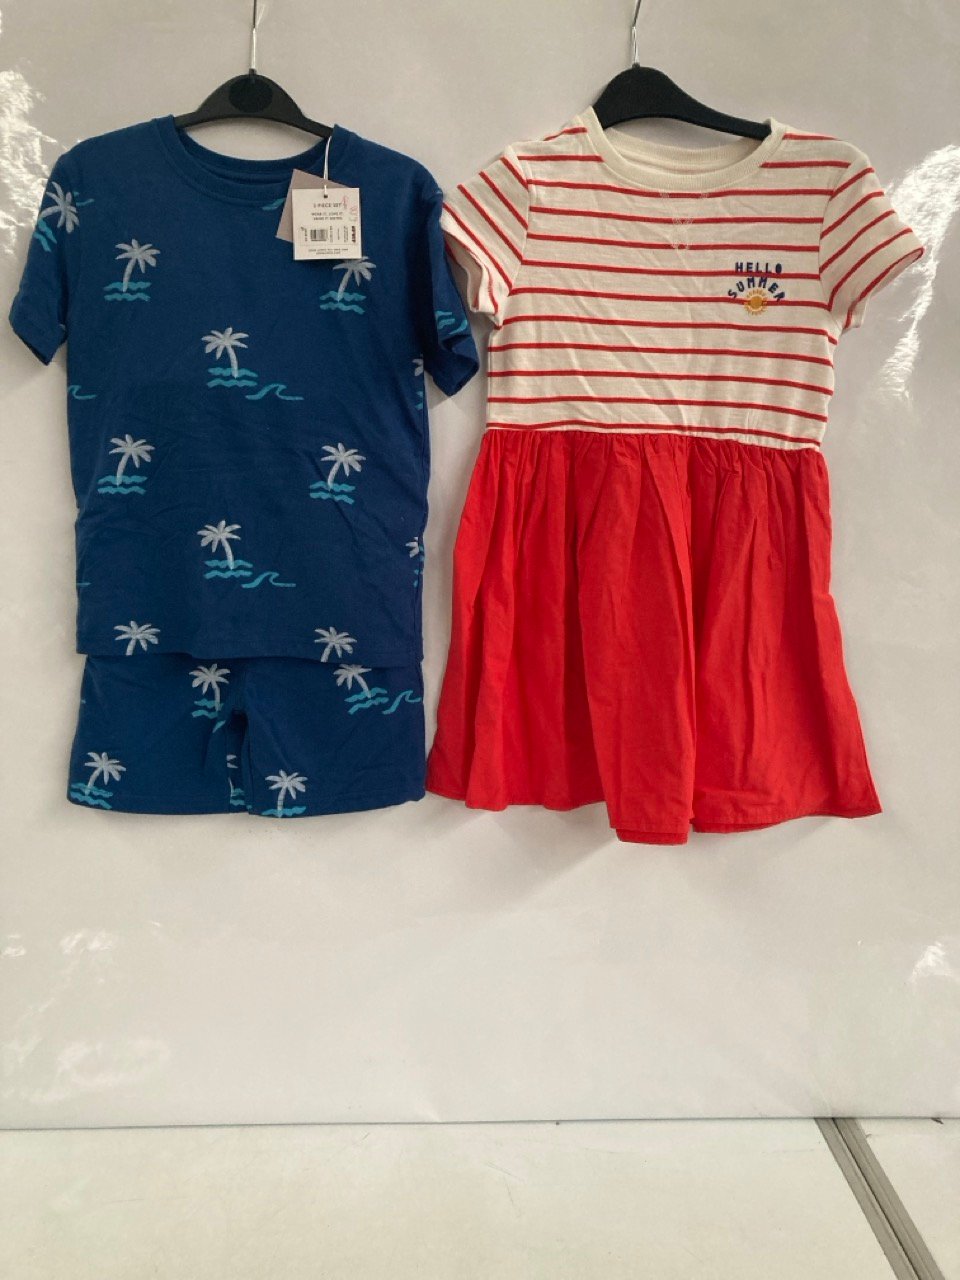 BOX OF JOHN LEWIS CHILDREN'S CLOTHING TO INCLUDE BLUE LEGGINGS WITH DOGS